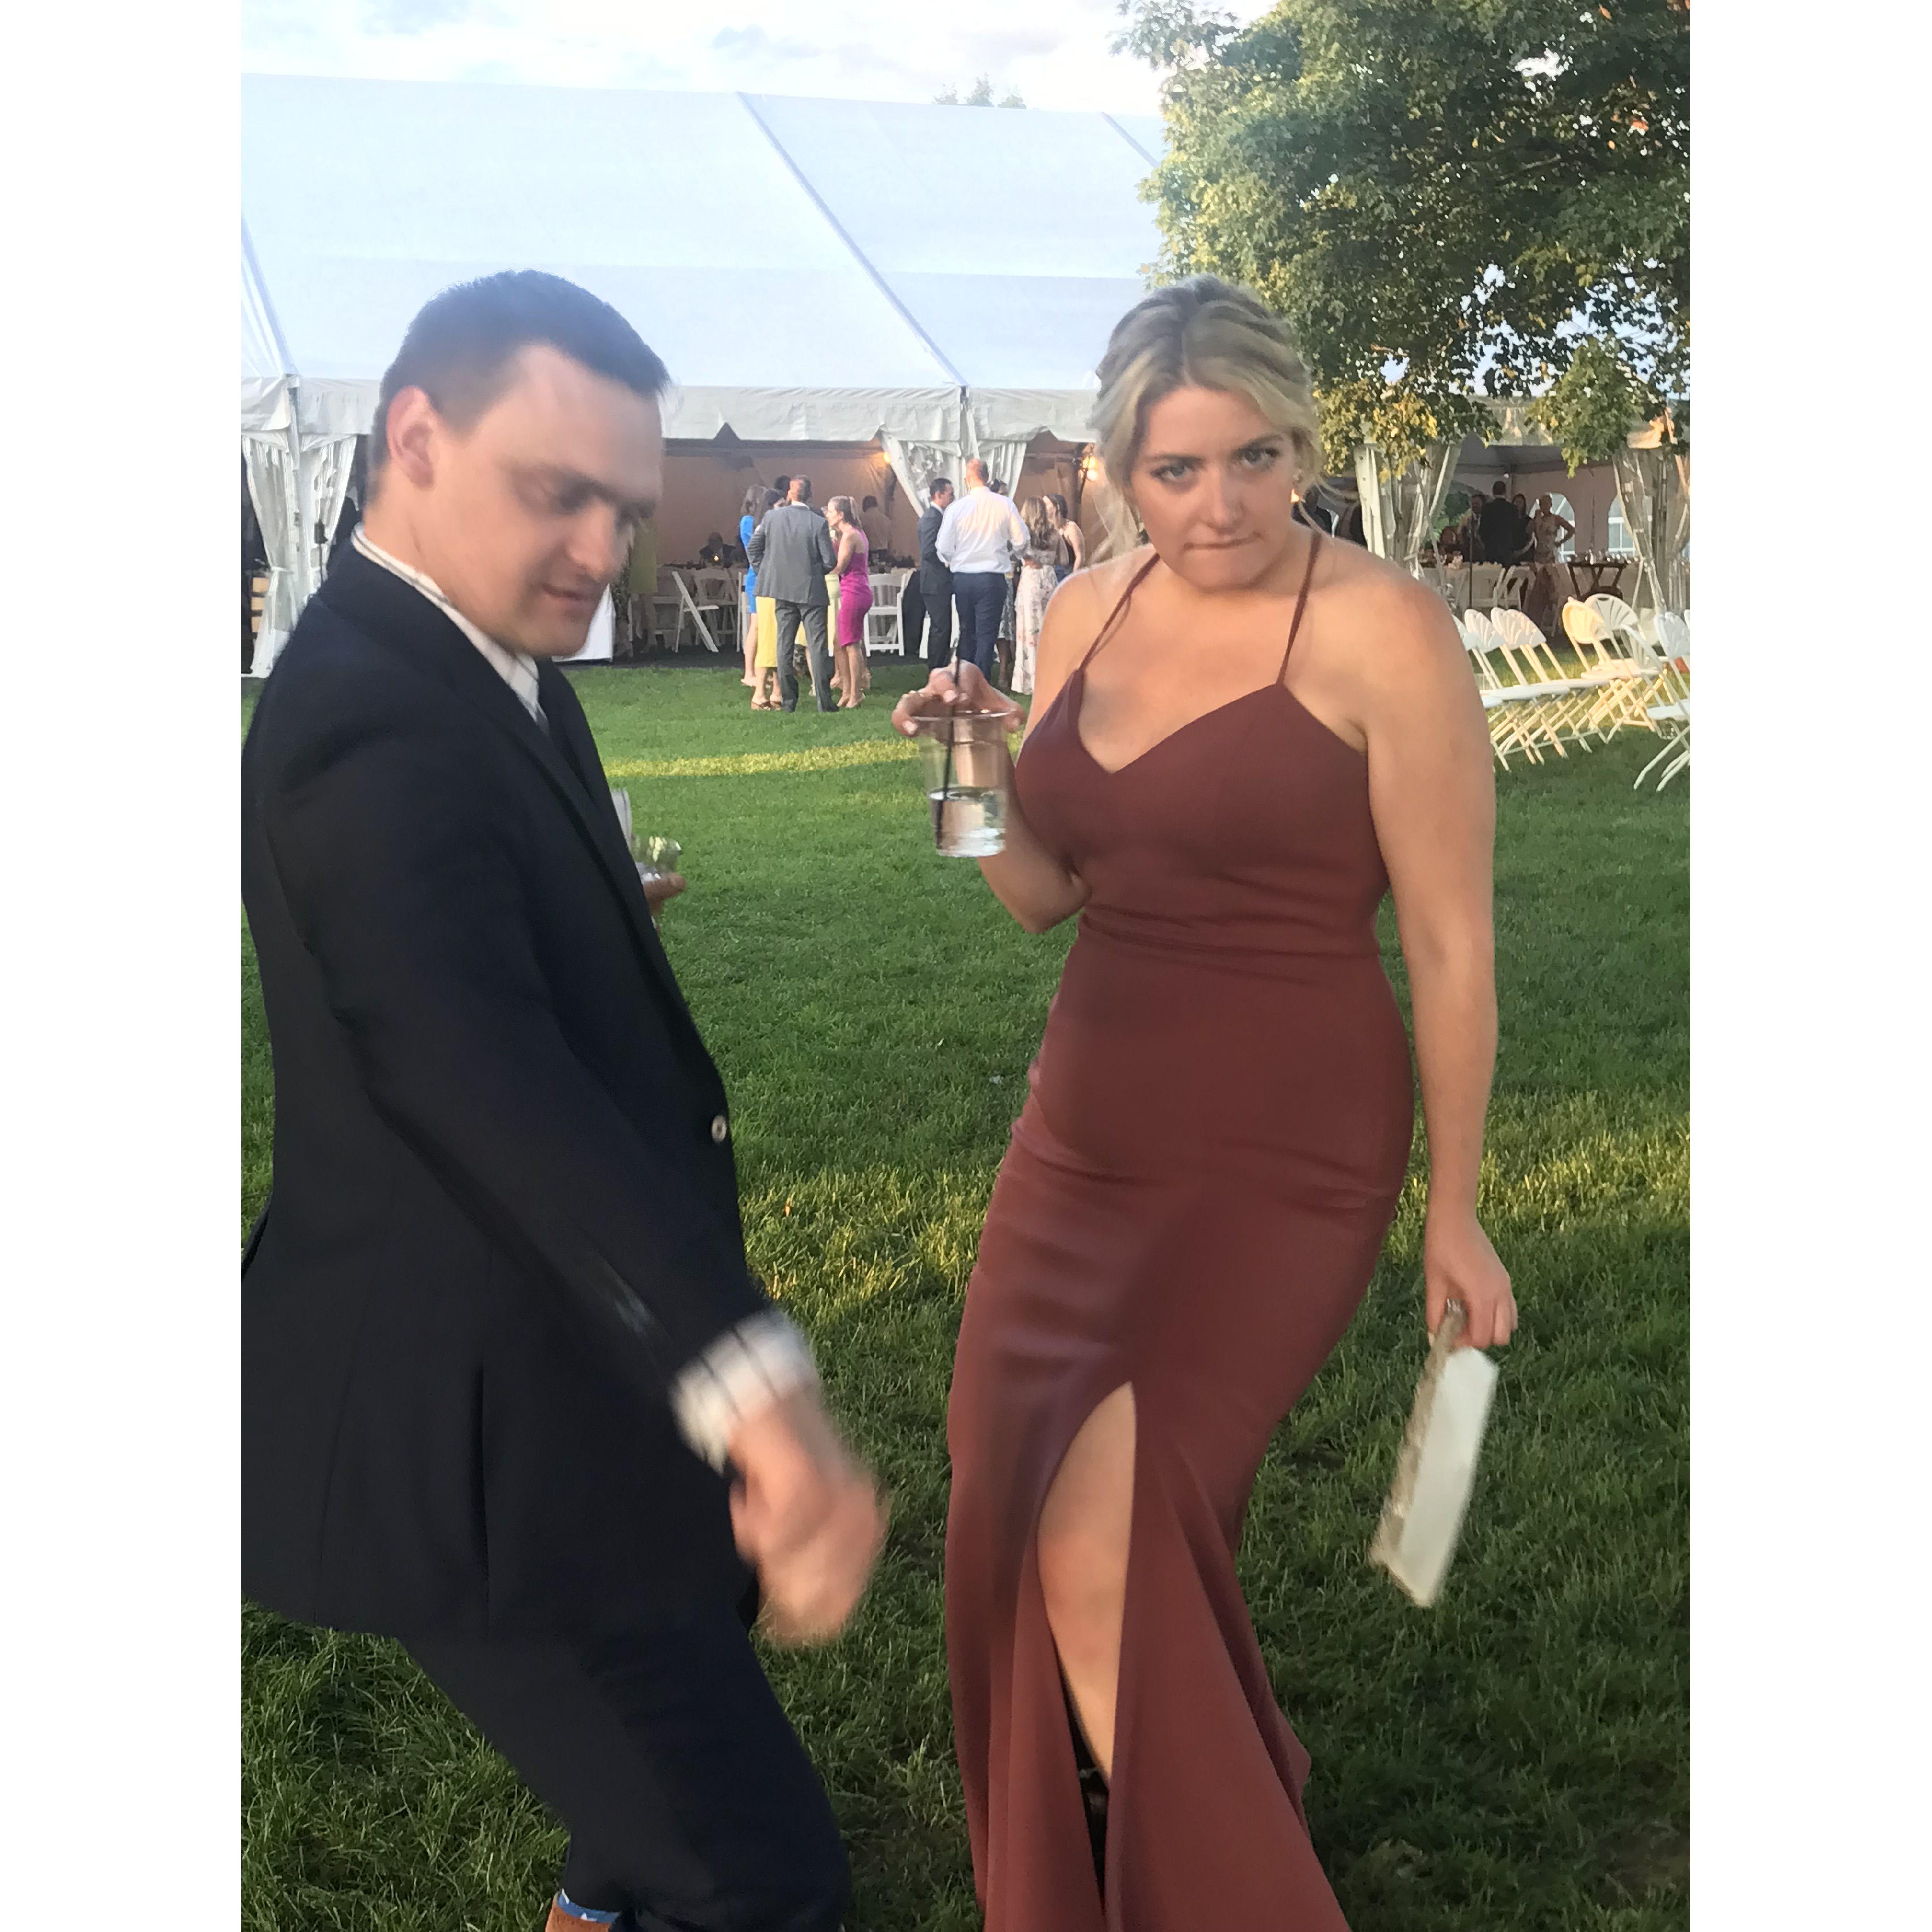 New Hampshire, June 2019 Ross and Bry's Wedding (Daniel meets the entire Anderson family) 